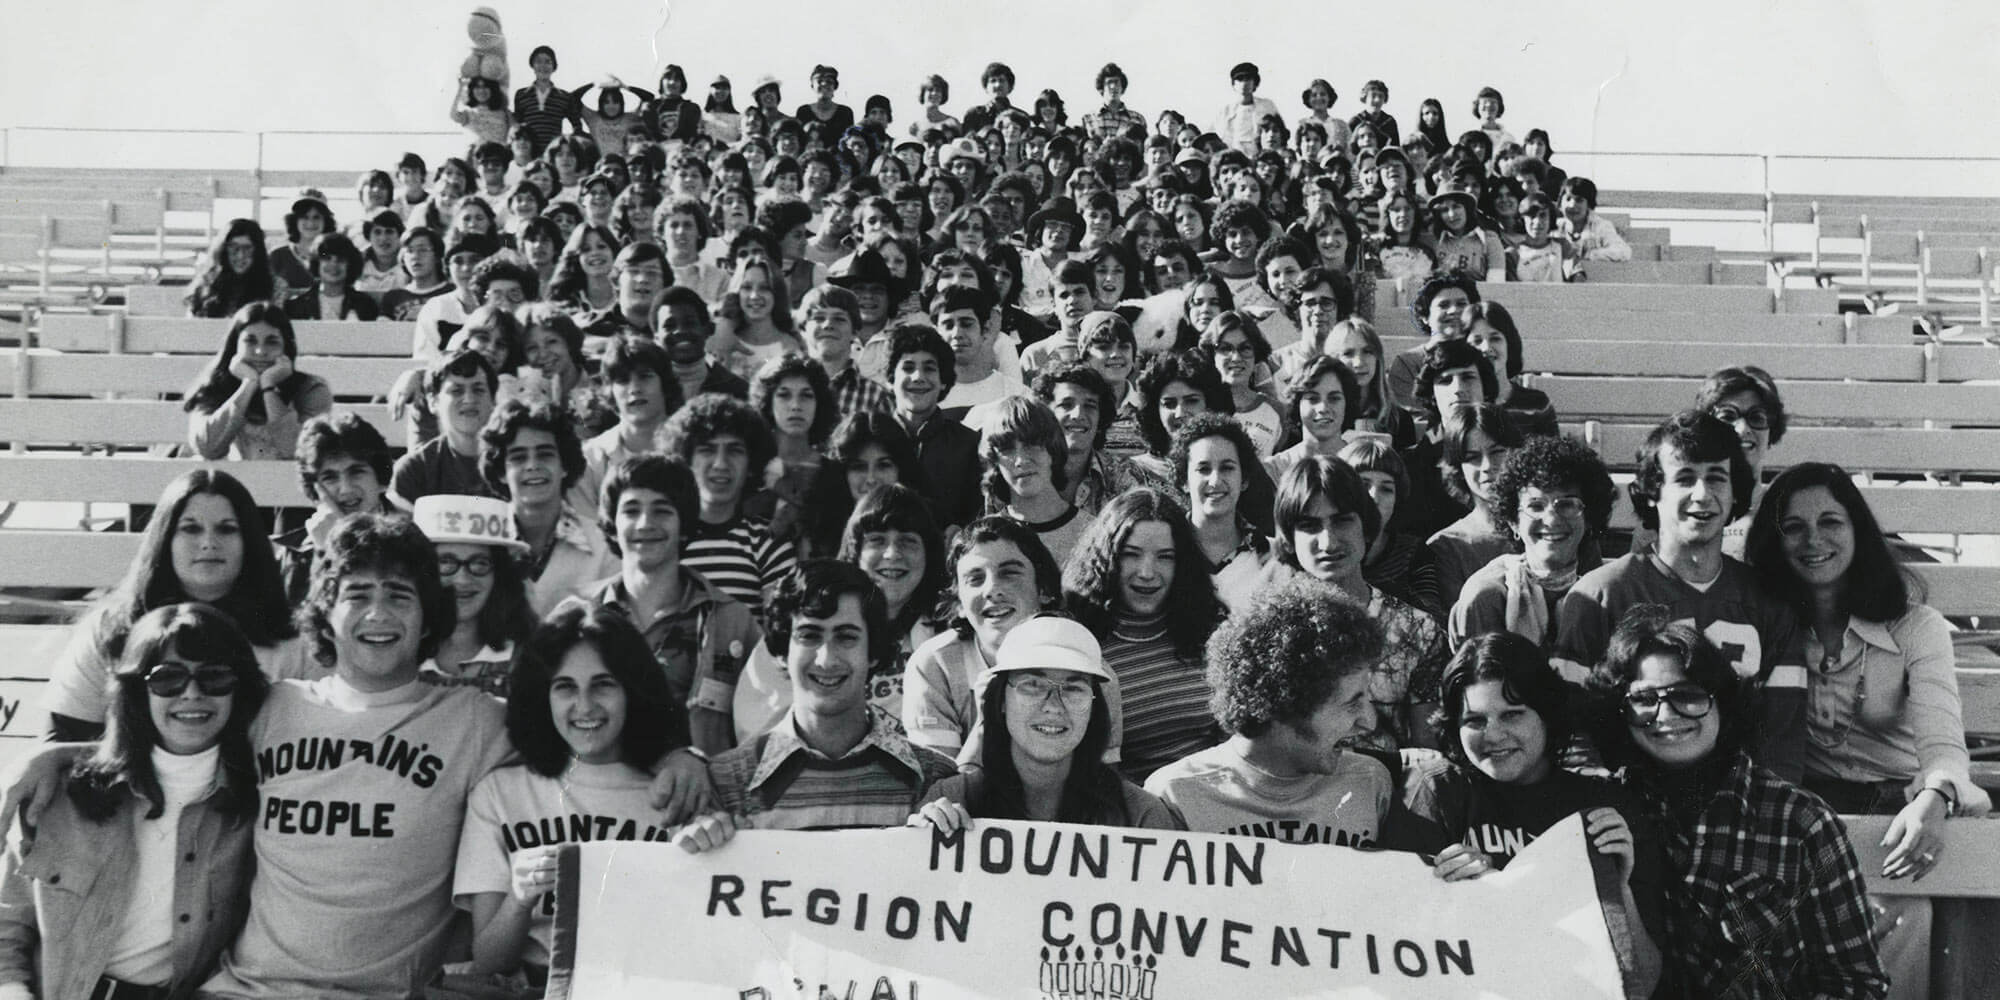 Photograph of Mountain Region Convention of B'nai B'rith Youth Organization, circa 1977. Burt and Wilma Bass Photographs and Programs. UNLV Special Collections.